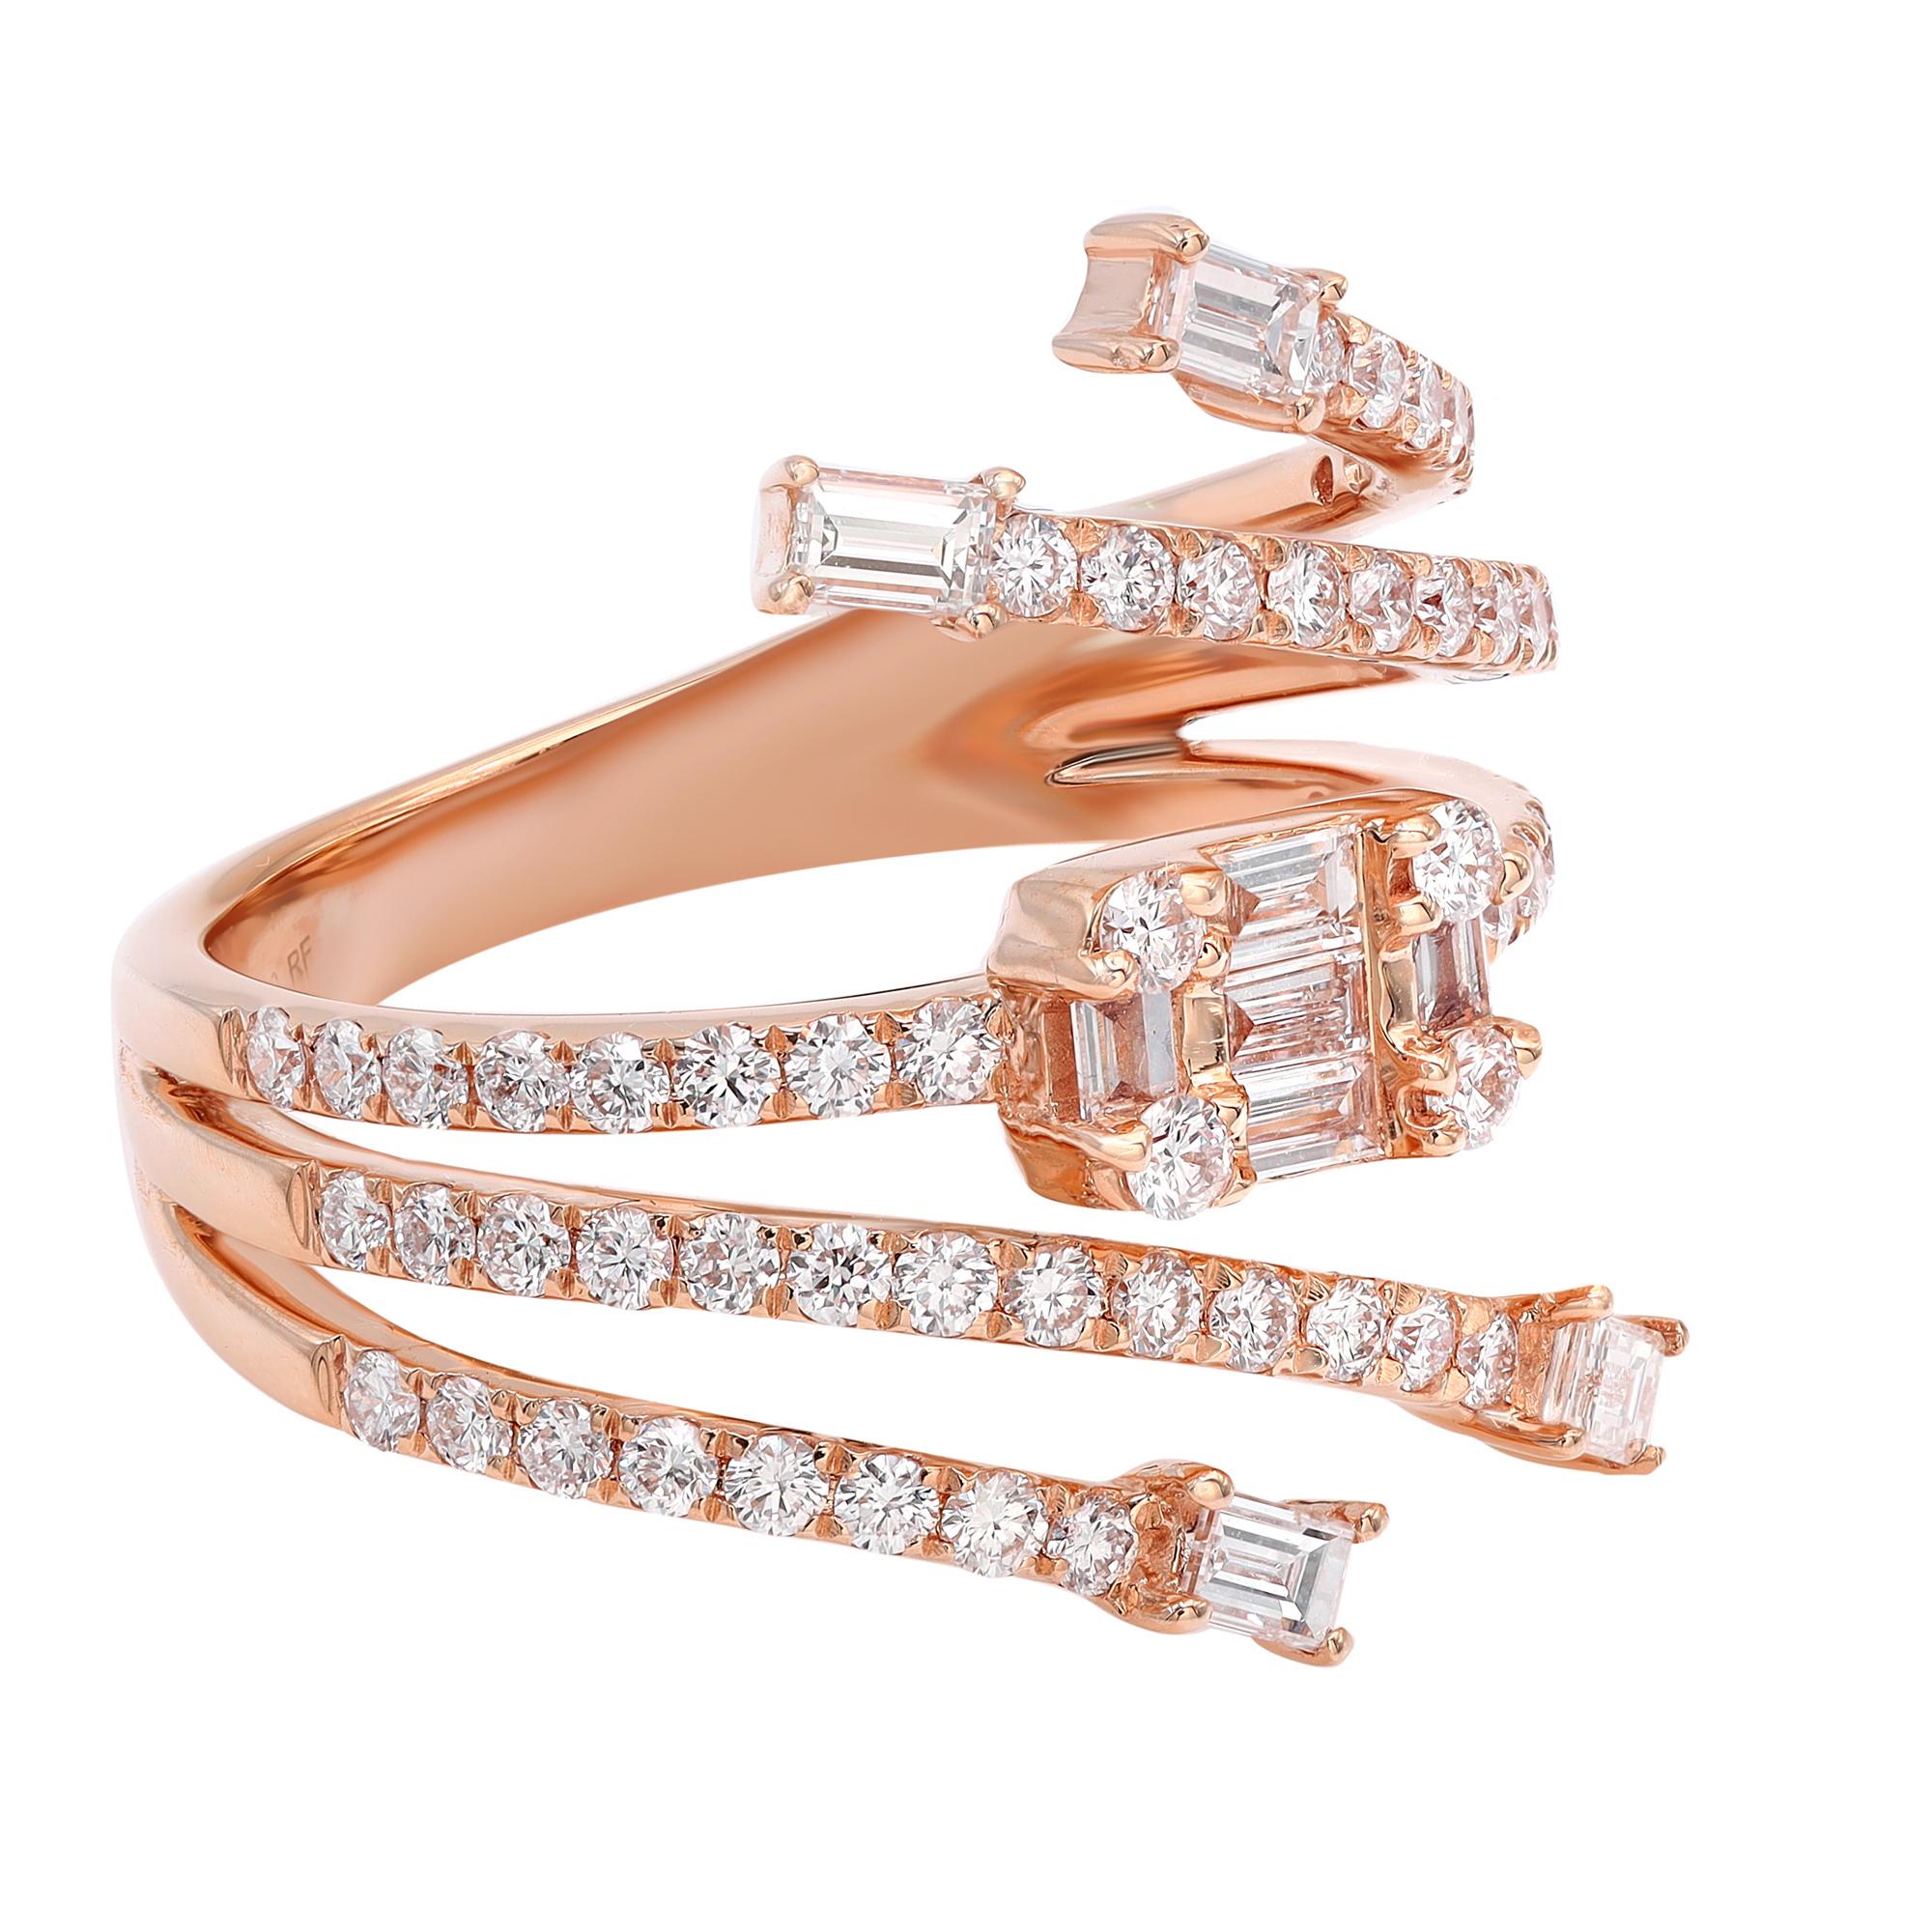 This stunning diamond ring comes with a flashy statement look. A must have in your jewelry collection. Crafted in 18K rose gold. This ring features baguette and round cut diamonds weighing 1.19 carats in prong and channel setting. Diamond color G-H